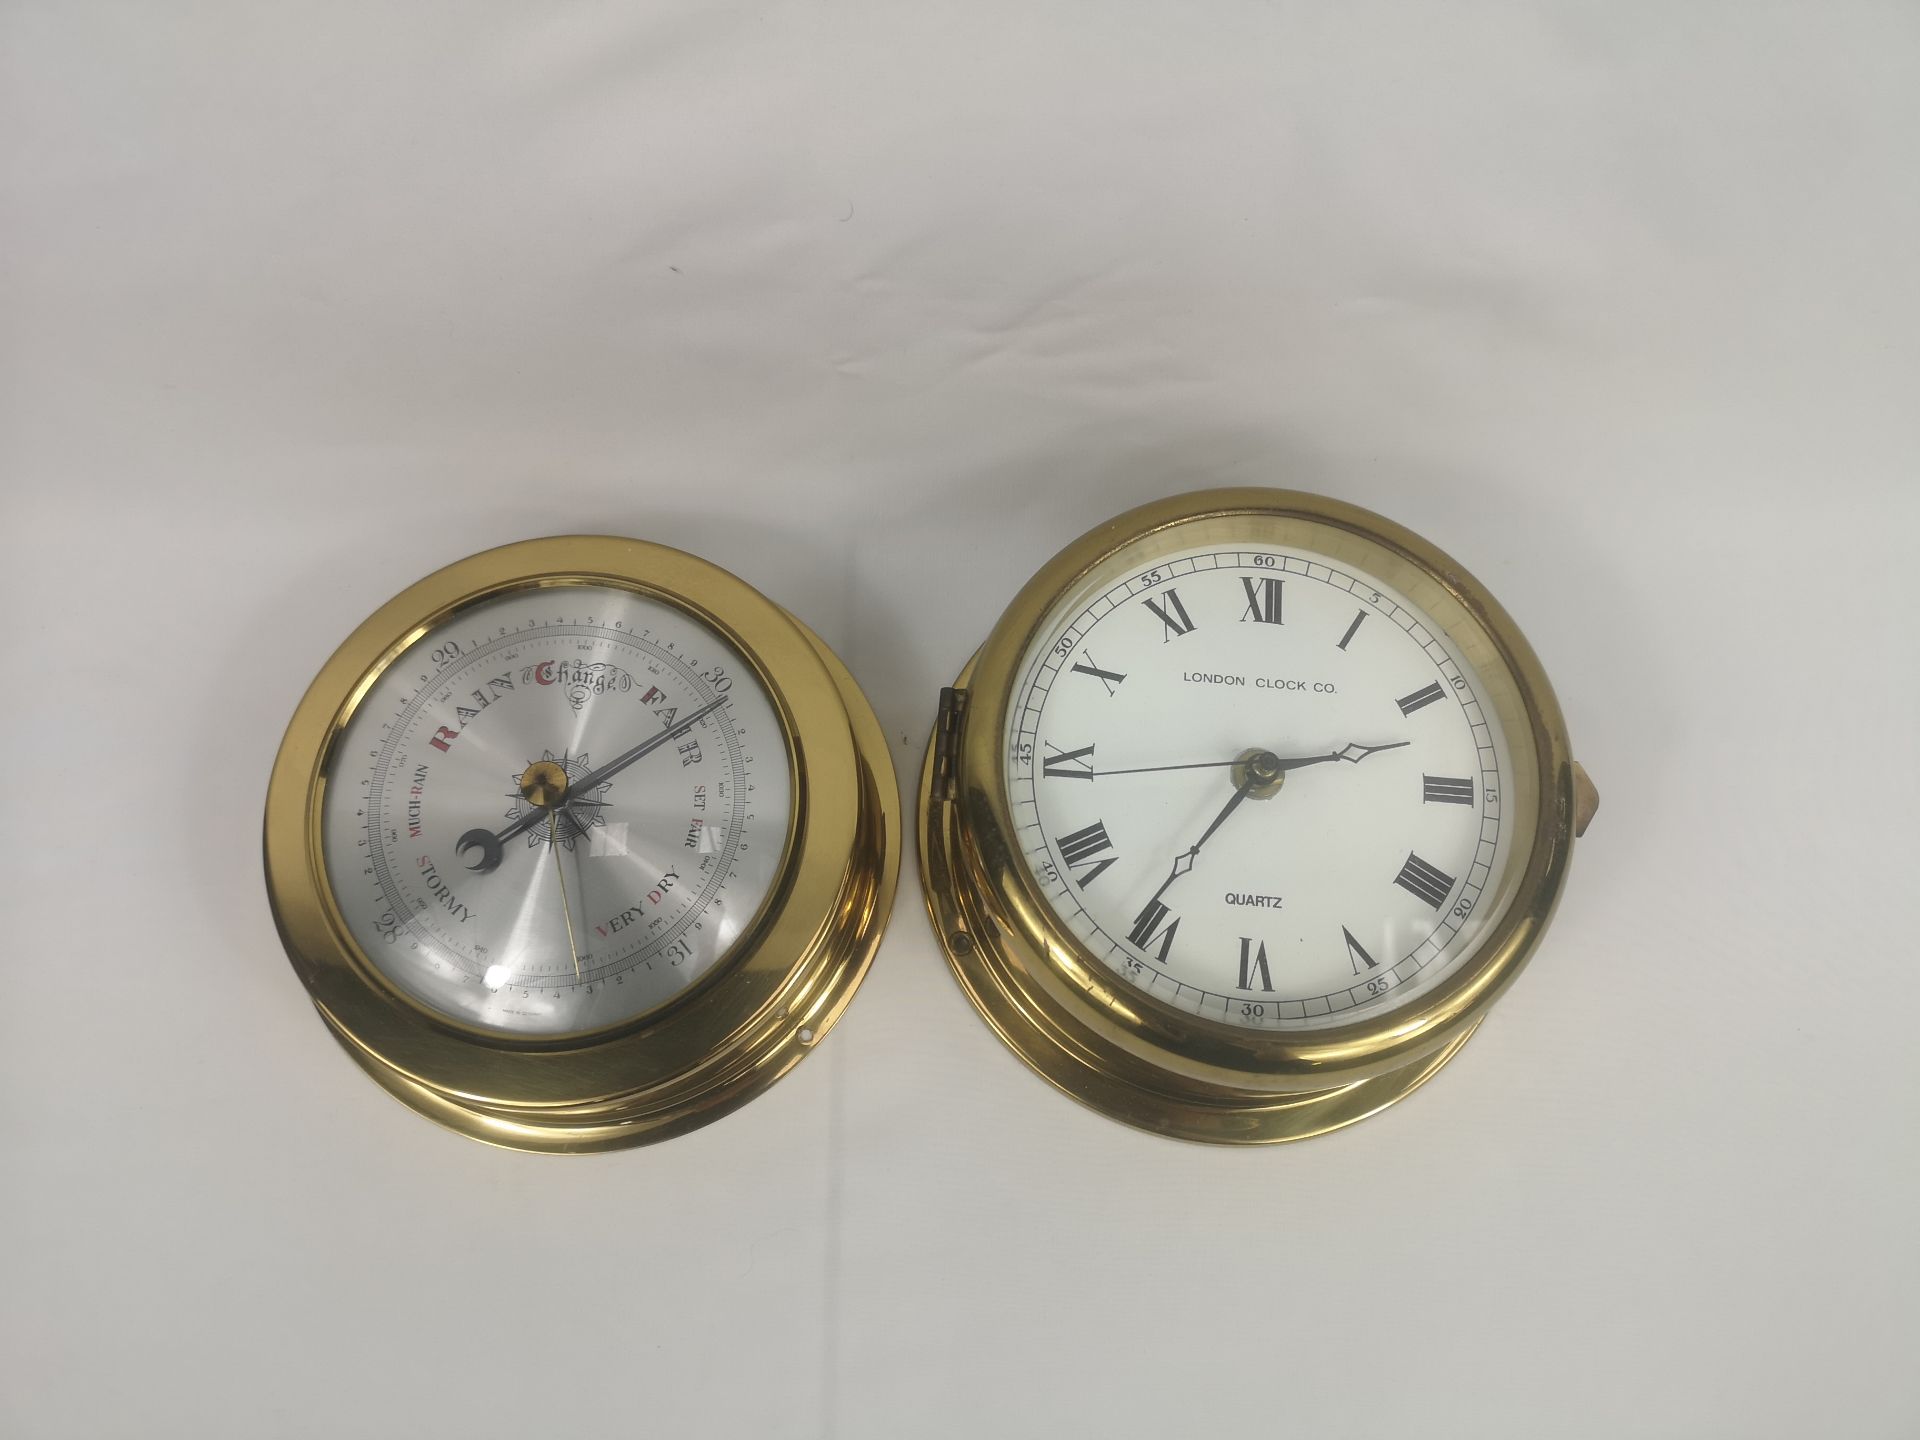 Brass London Clock Co. wall clock together with a brass barometer